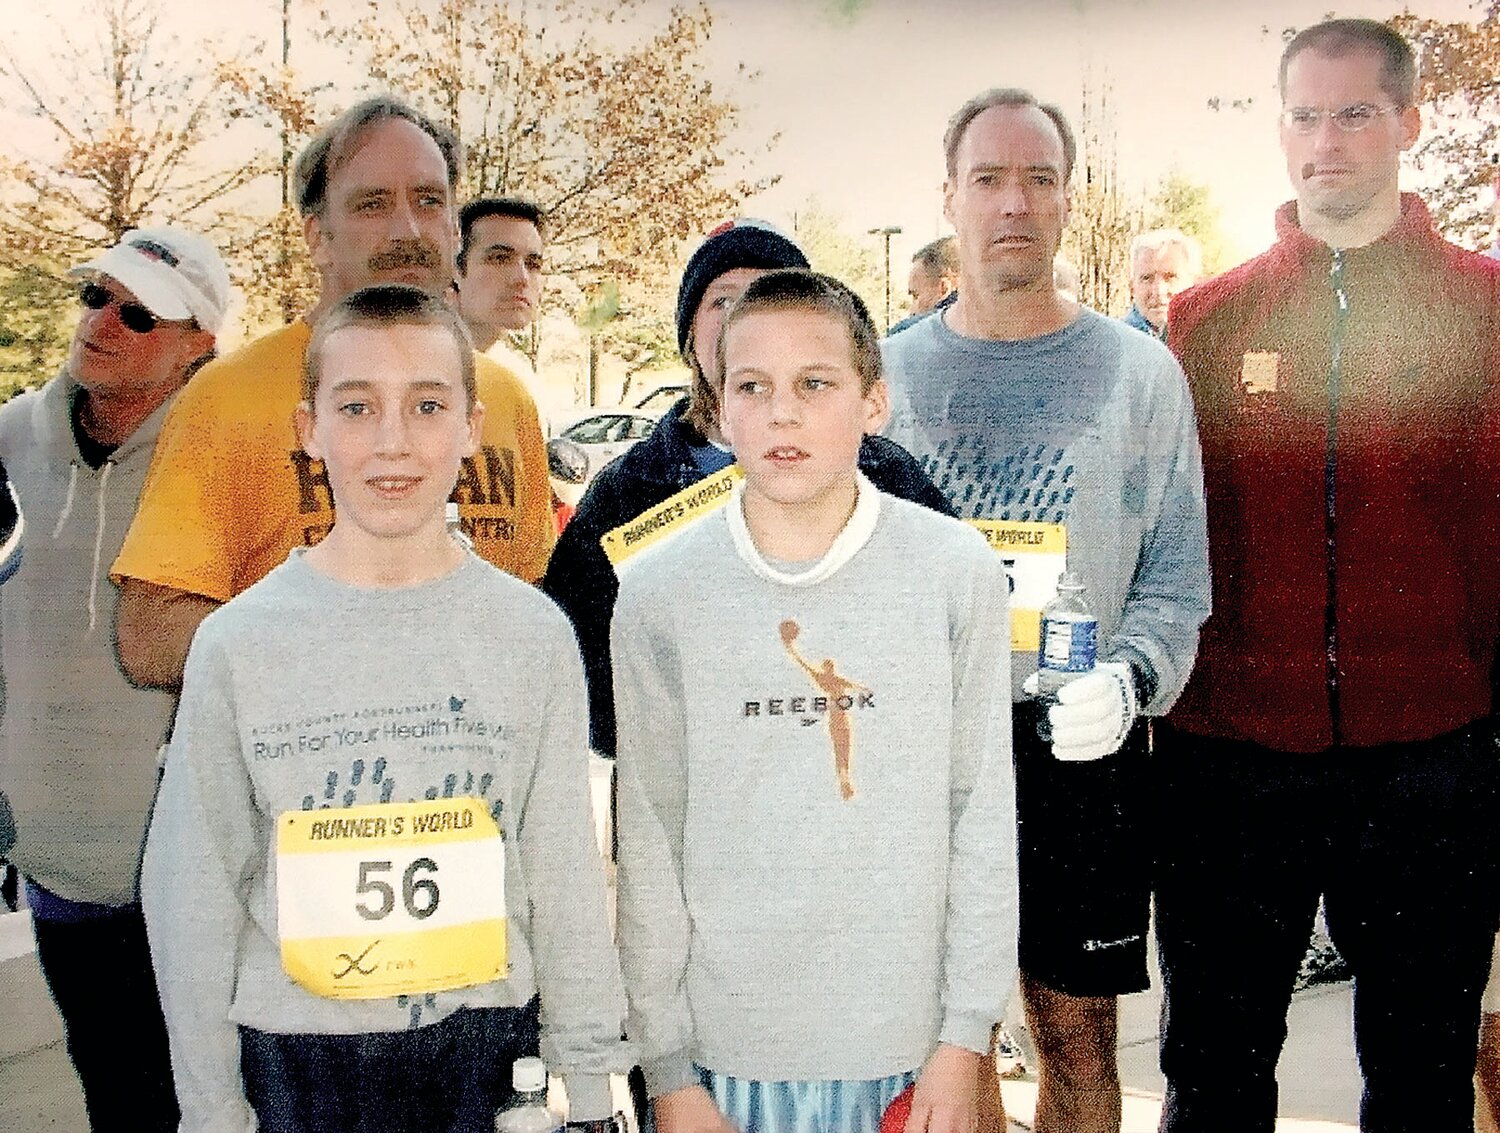 Back in 2001, Patrick Haneman, 10, and Connor Haneman, 9, ran their first Thanksgiving Day race with Tony Haneman and Niel Haneman.